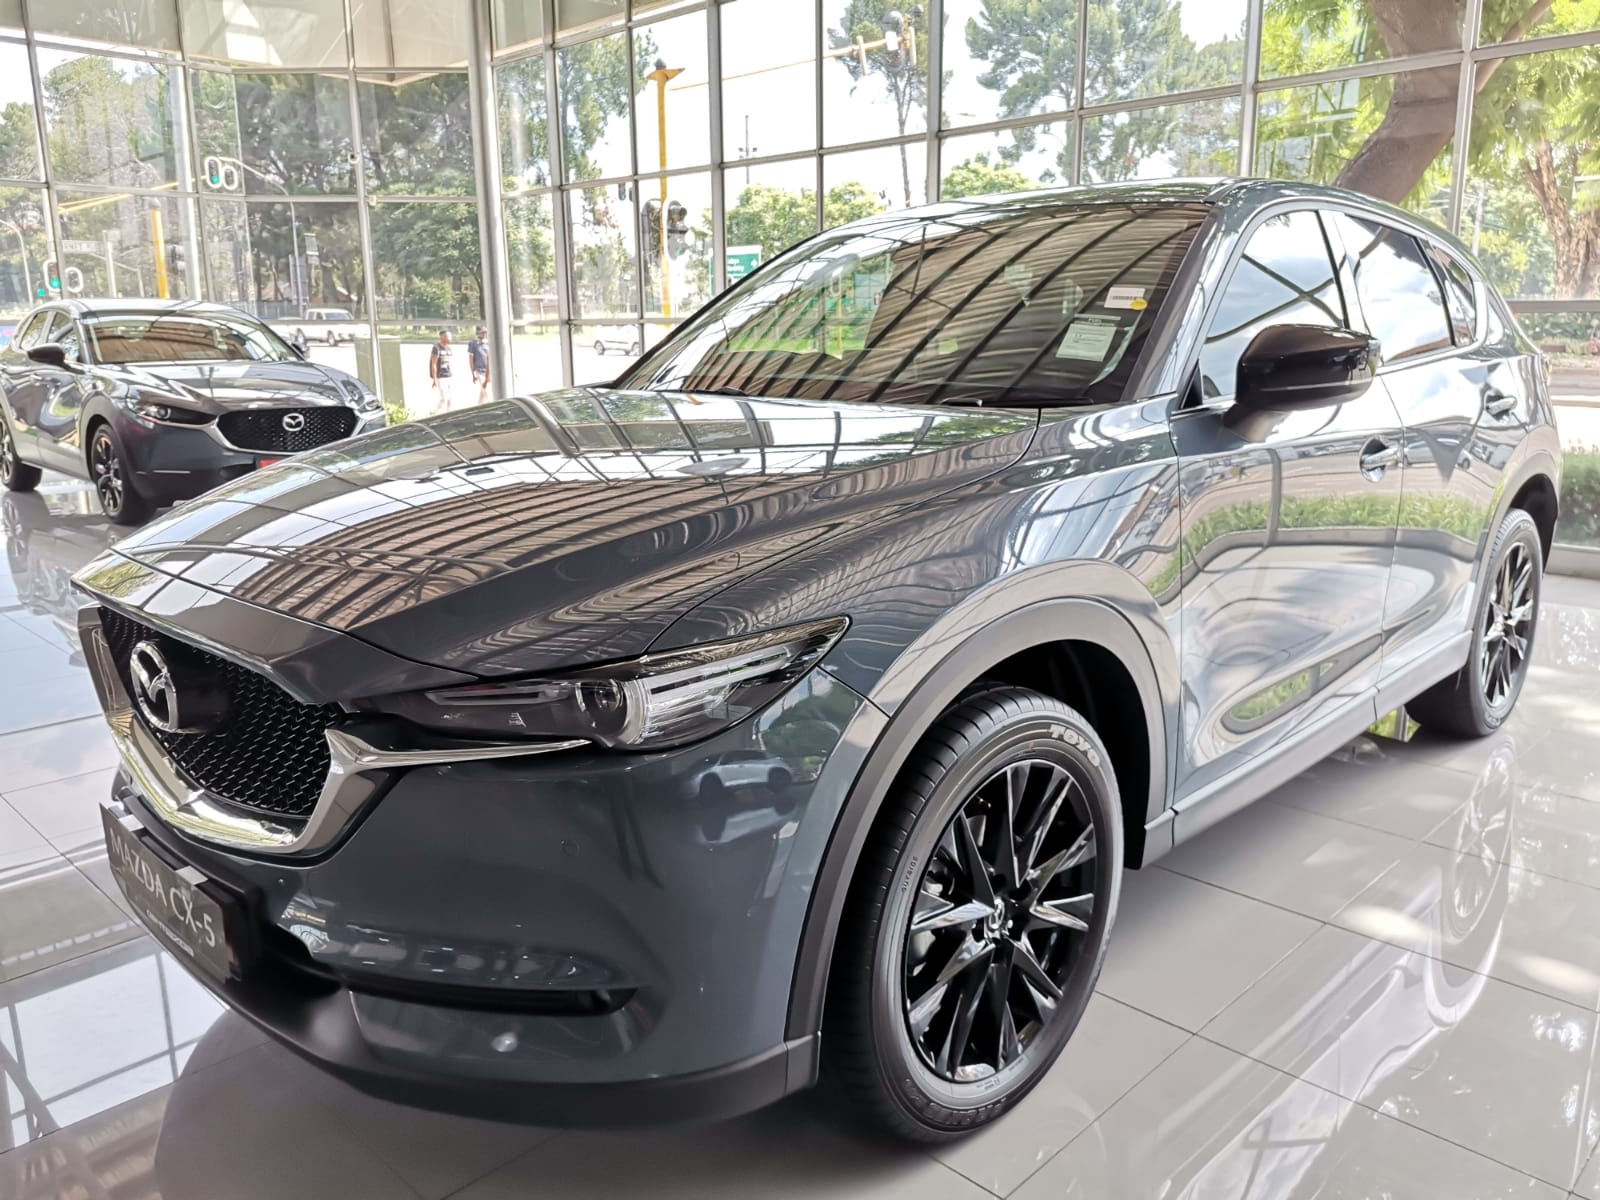 Mazda CX 30 Carbon Edition, A Must-Have SUV